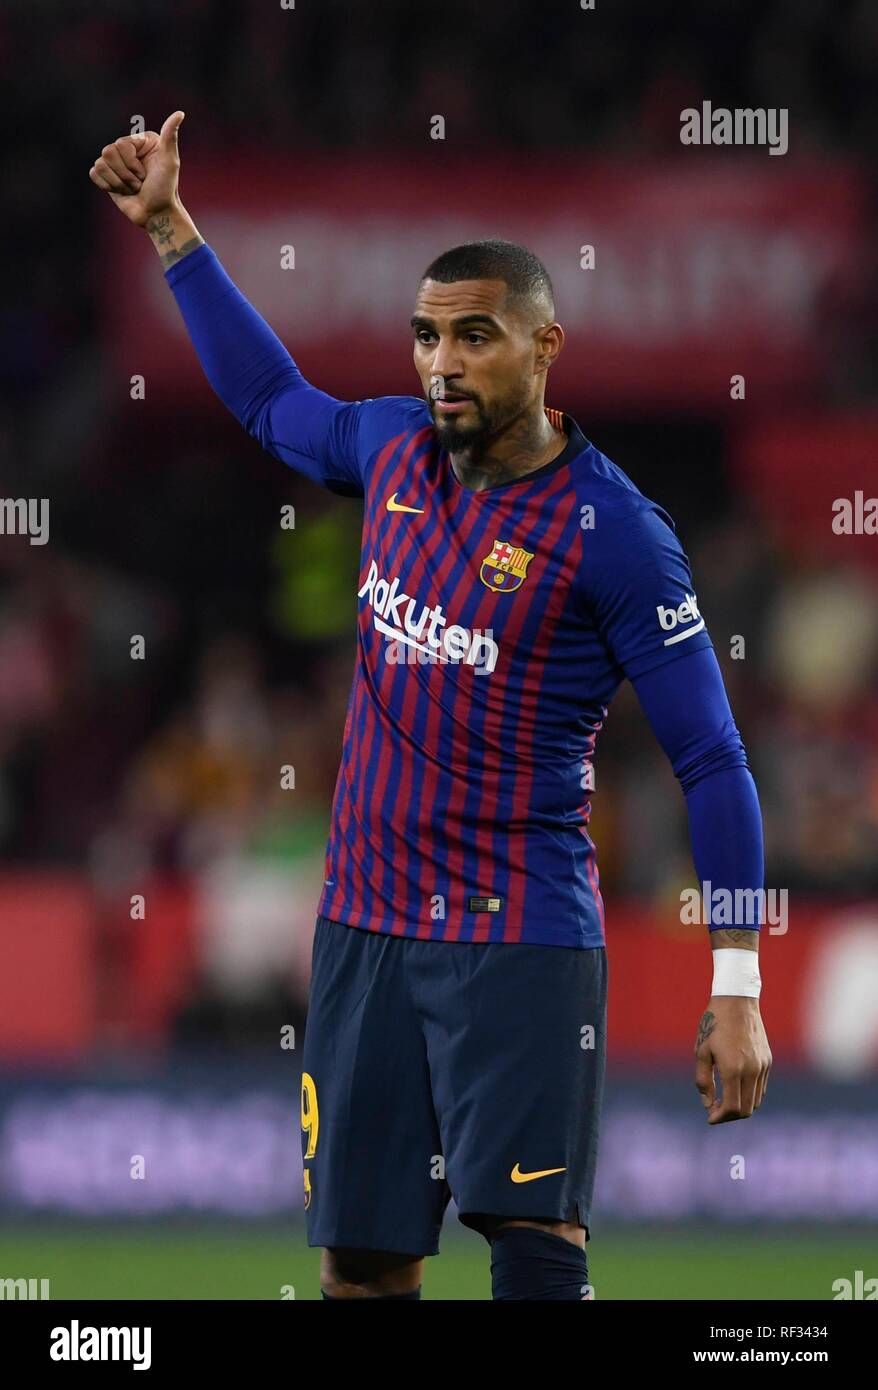 Seville, Spain. 23rd January, 2019. Prince Boateng during the match belonging to the quarterfinals of the Copa del Rey, facing Sevilla FC and FC Barcelona, at the Ramon Sanchez Pizjuan stadium, Seville, Andalucia Spain, January 23, 2019, photo: Cristobal Duenas / Cordon Press during the match belonging to the quarterfinals of the Copa del Rey, facing Sevilla FC and FC Barcelona, at the Ramon Sanchez Pizjuan stadium, Seville, Andalucia Spain, January 23, 2019, photo: Cristobal Duenas / Cordon Press  Cordon Press Credit: CORDON PRESS/Alamy Live News Stock Photo